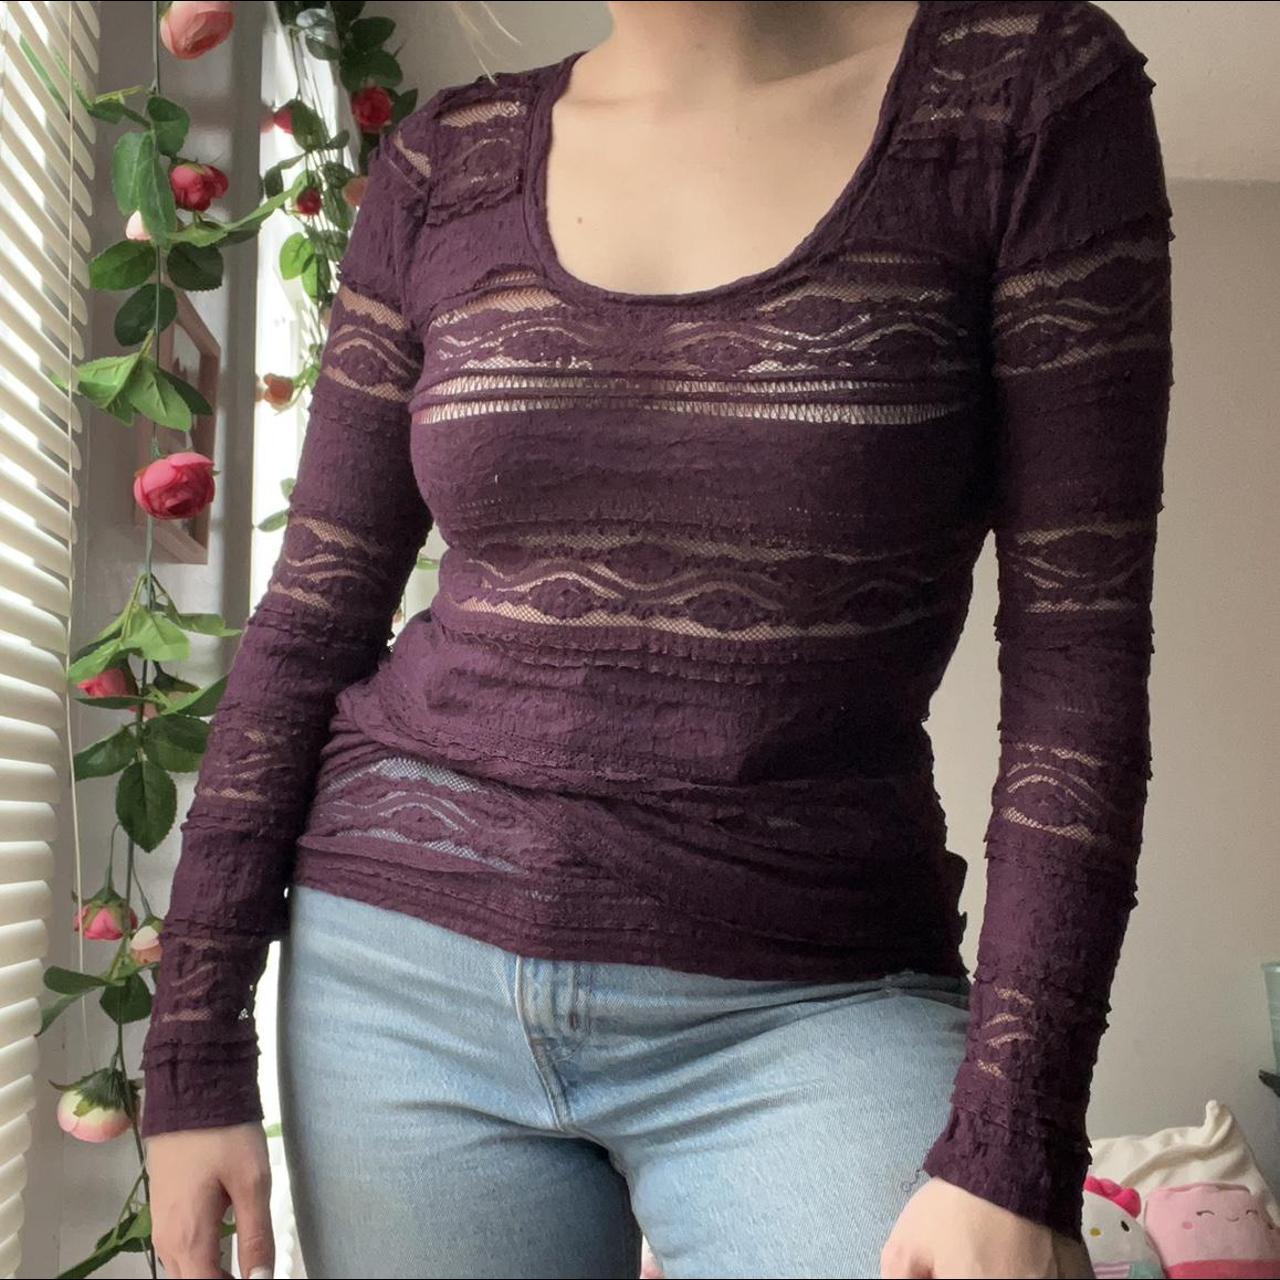 Dark Purple Lace Mesh Top ! From express! I could... - Depop